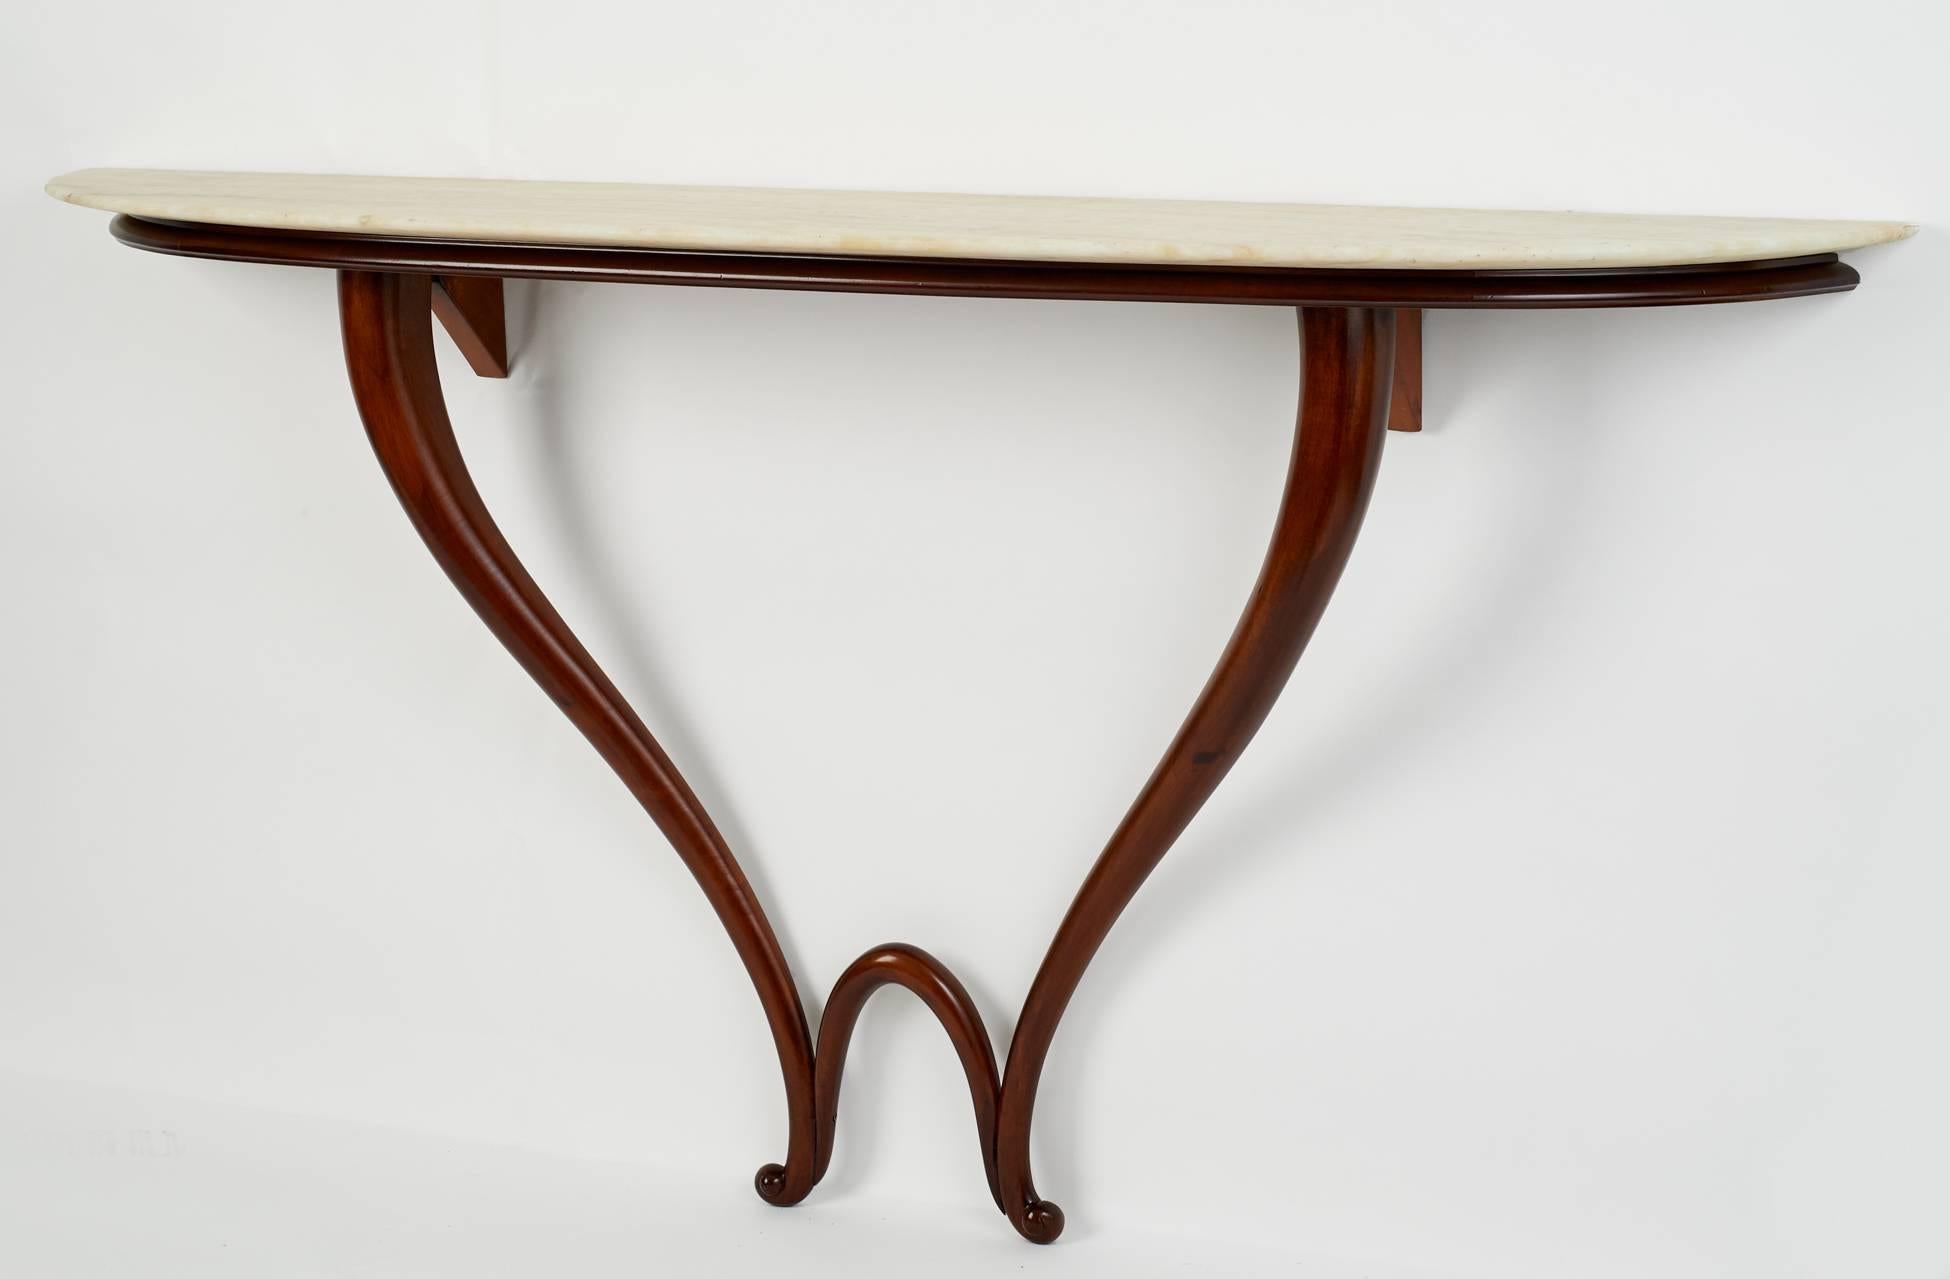 A sculptural double-beveled mahogany console in the style of Gio Ponti, with a delicately curving and tapered base supporting a graciously shaped razor-edge marble top.